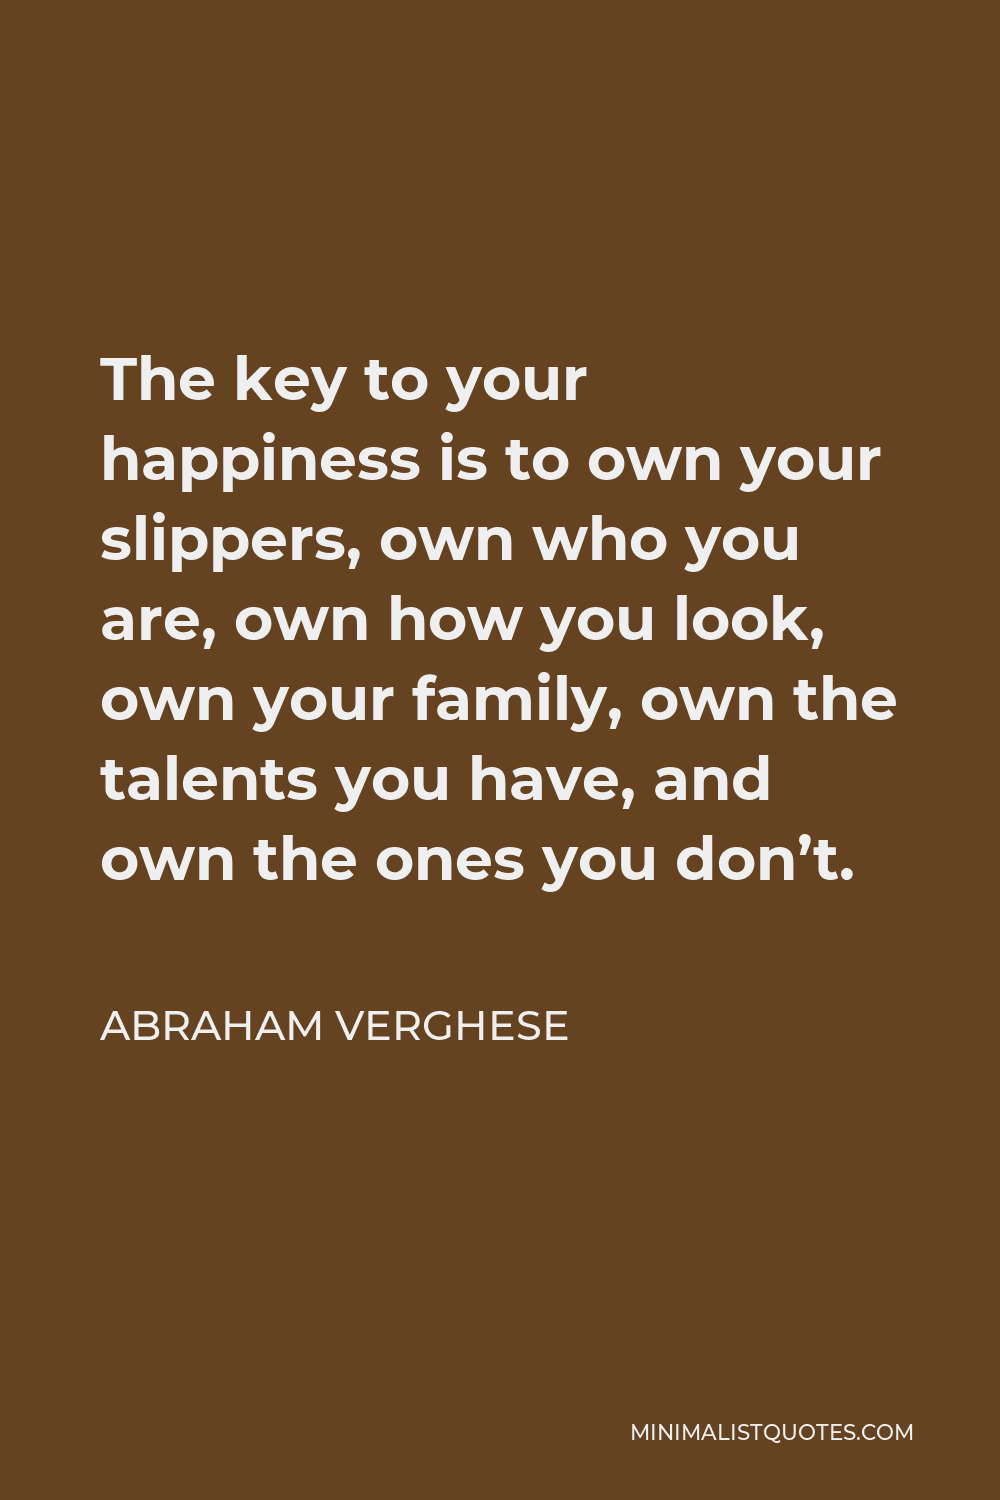 Abraham Verghese Quote - The key to your happiness is to own your slippers, own who you are, own how you look, own your family, own the talents you have, and own the ones you don’t.